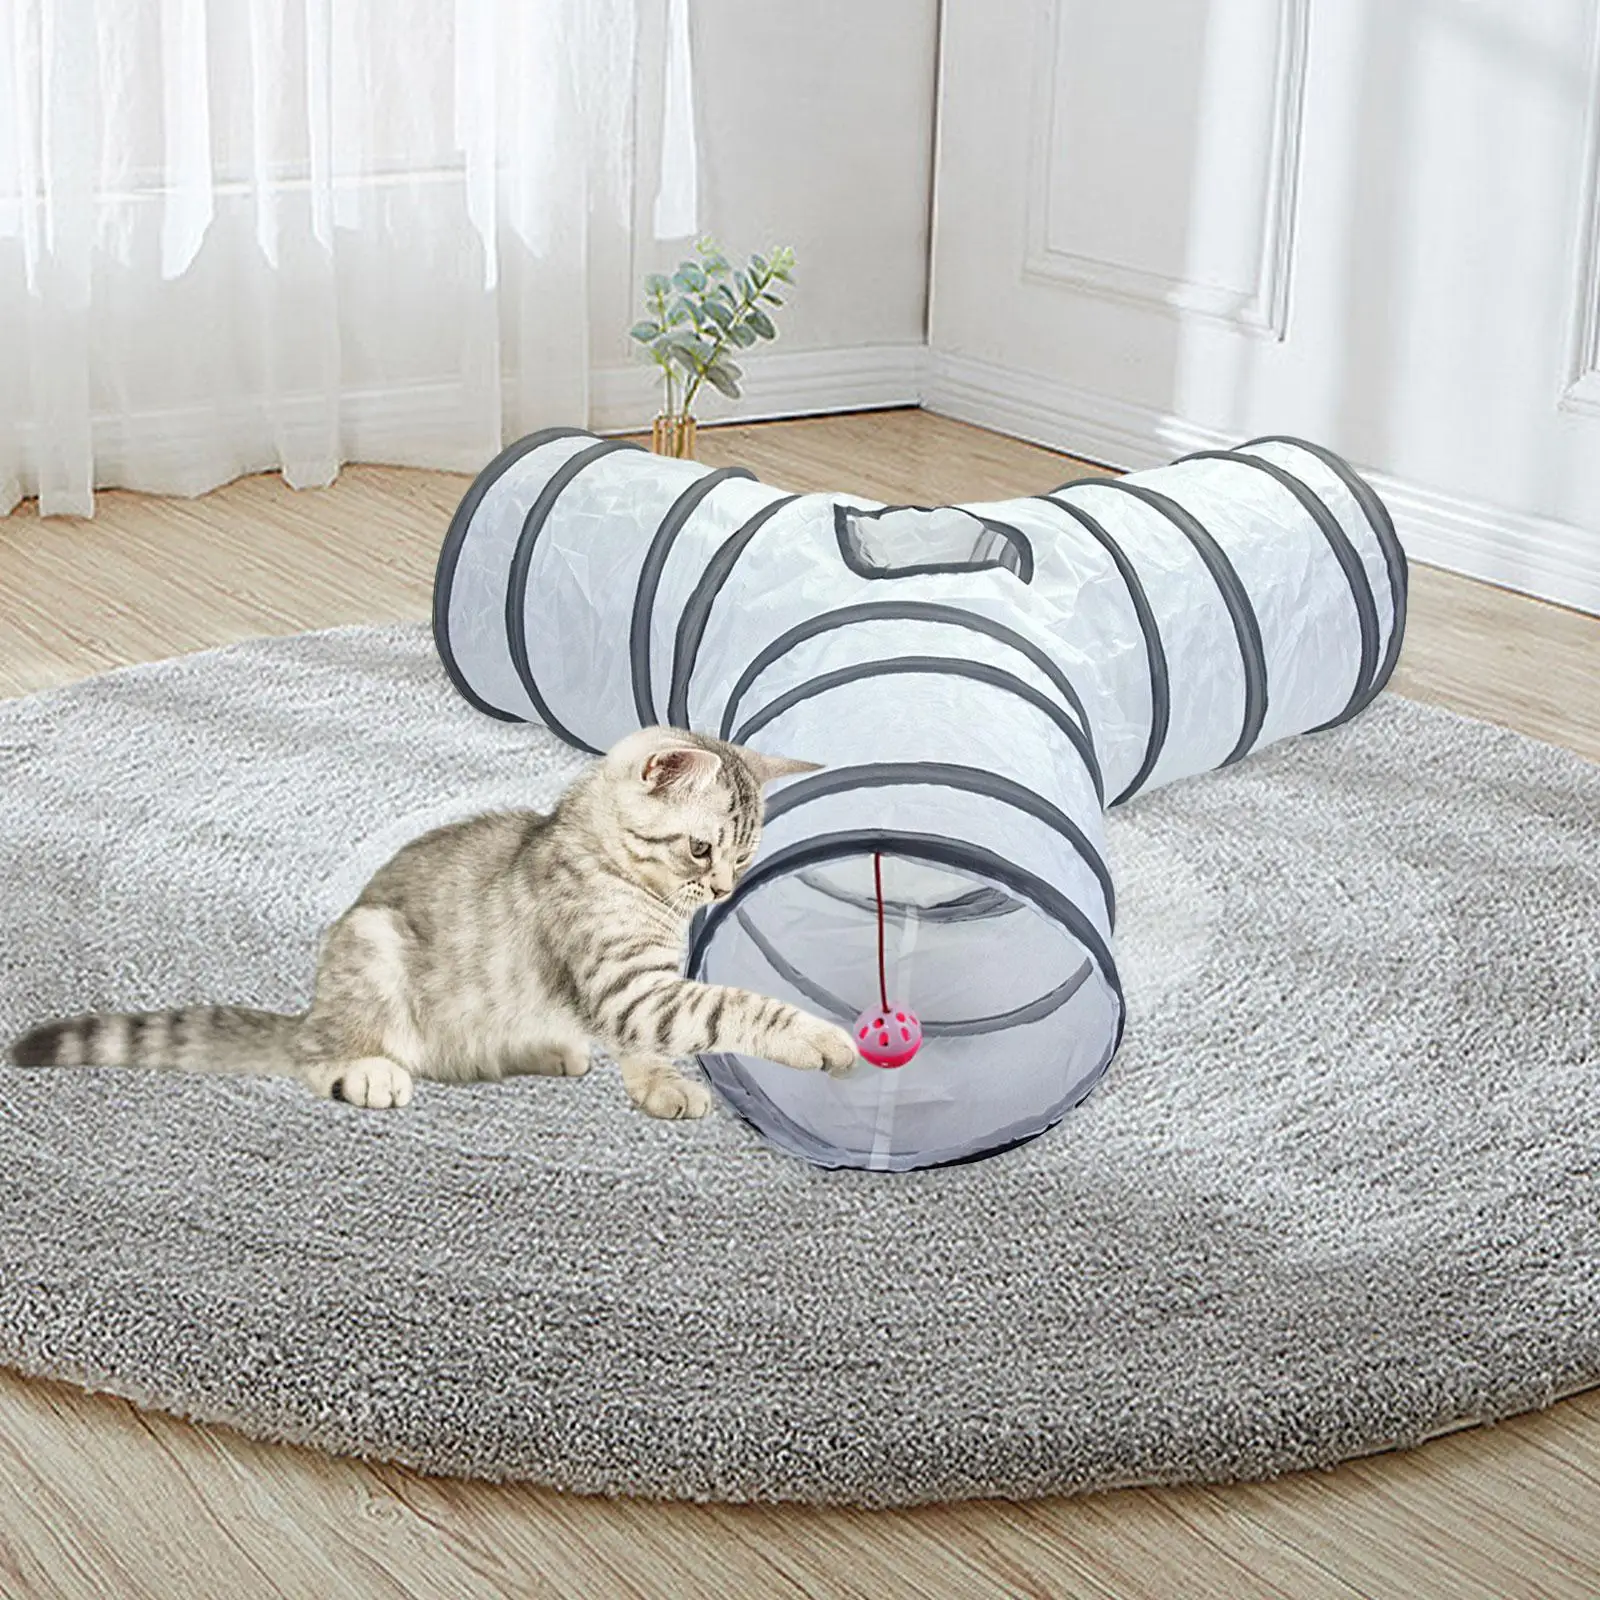 Collapsible Cats Tunnel Durable Structure Tear Resistant Kitten Playing Toy for Puppy Rabbit Guinea Pig Ferrets Training